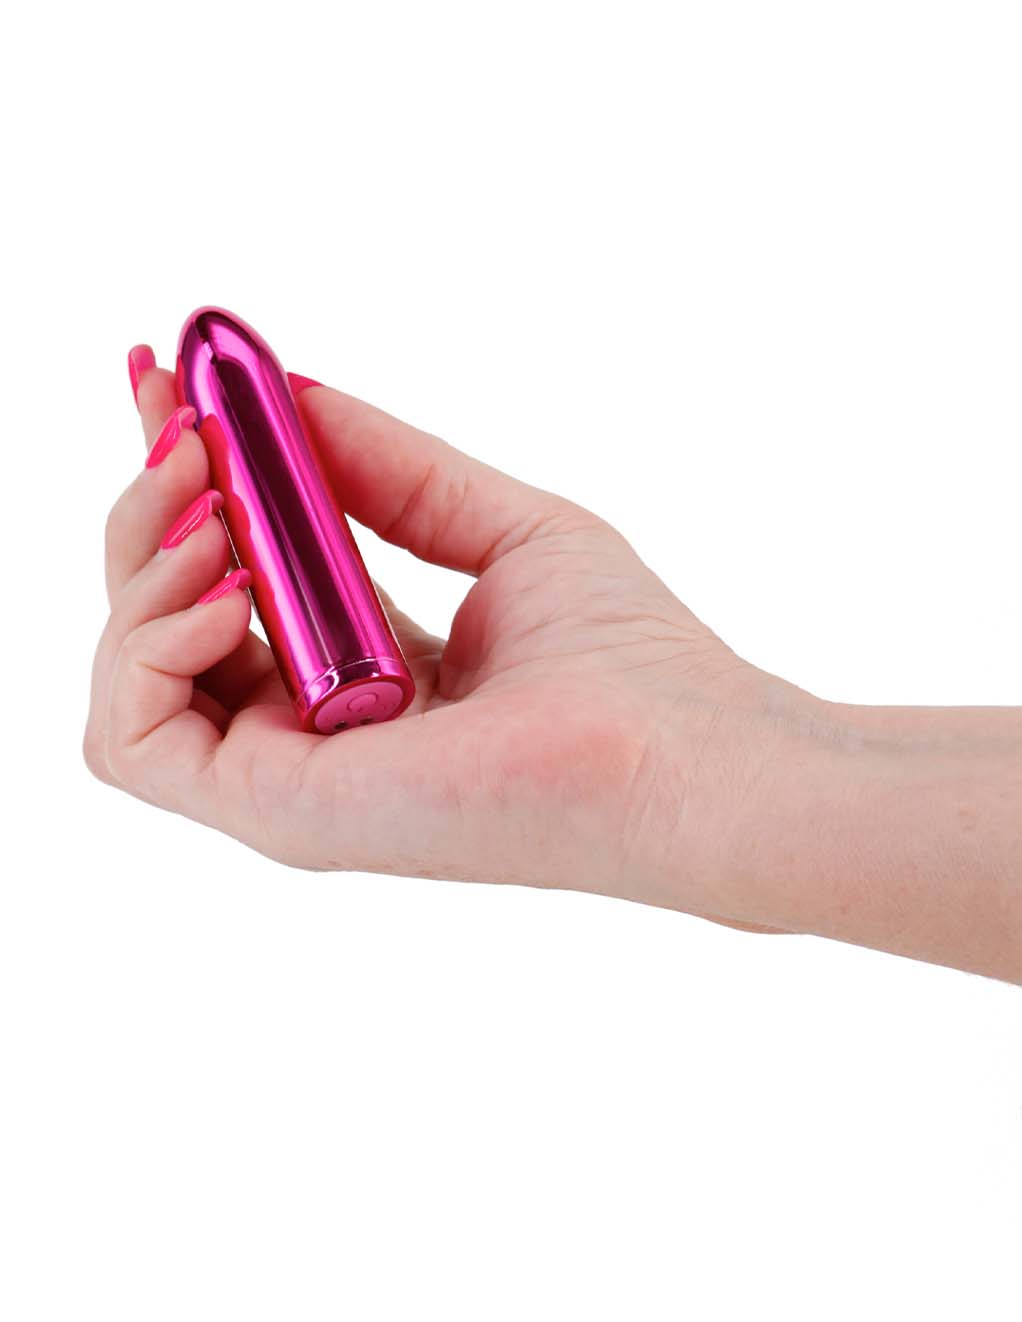 Chroma Petite Bullet- pink in hand